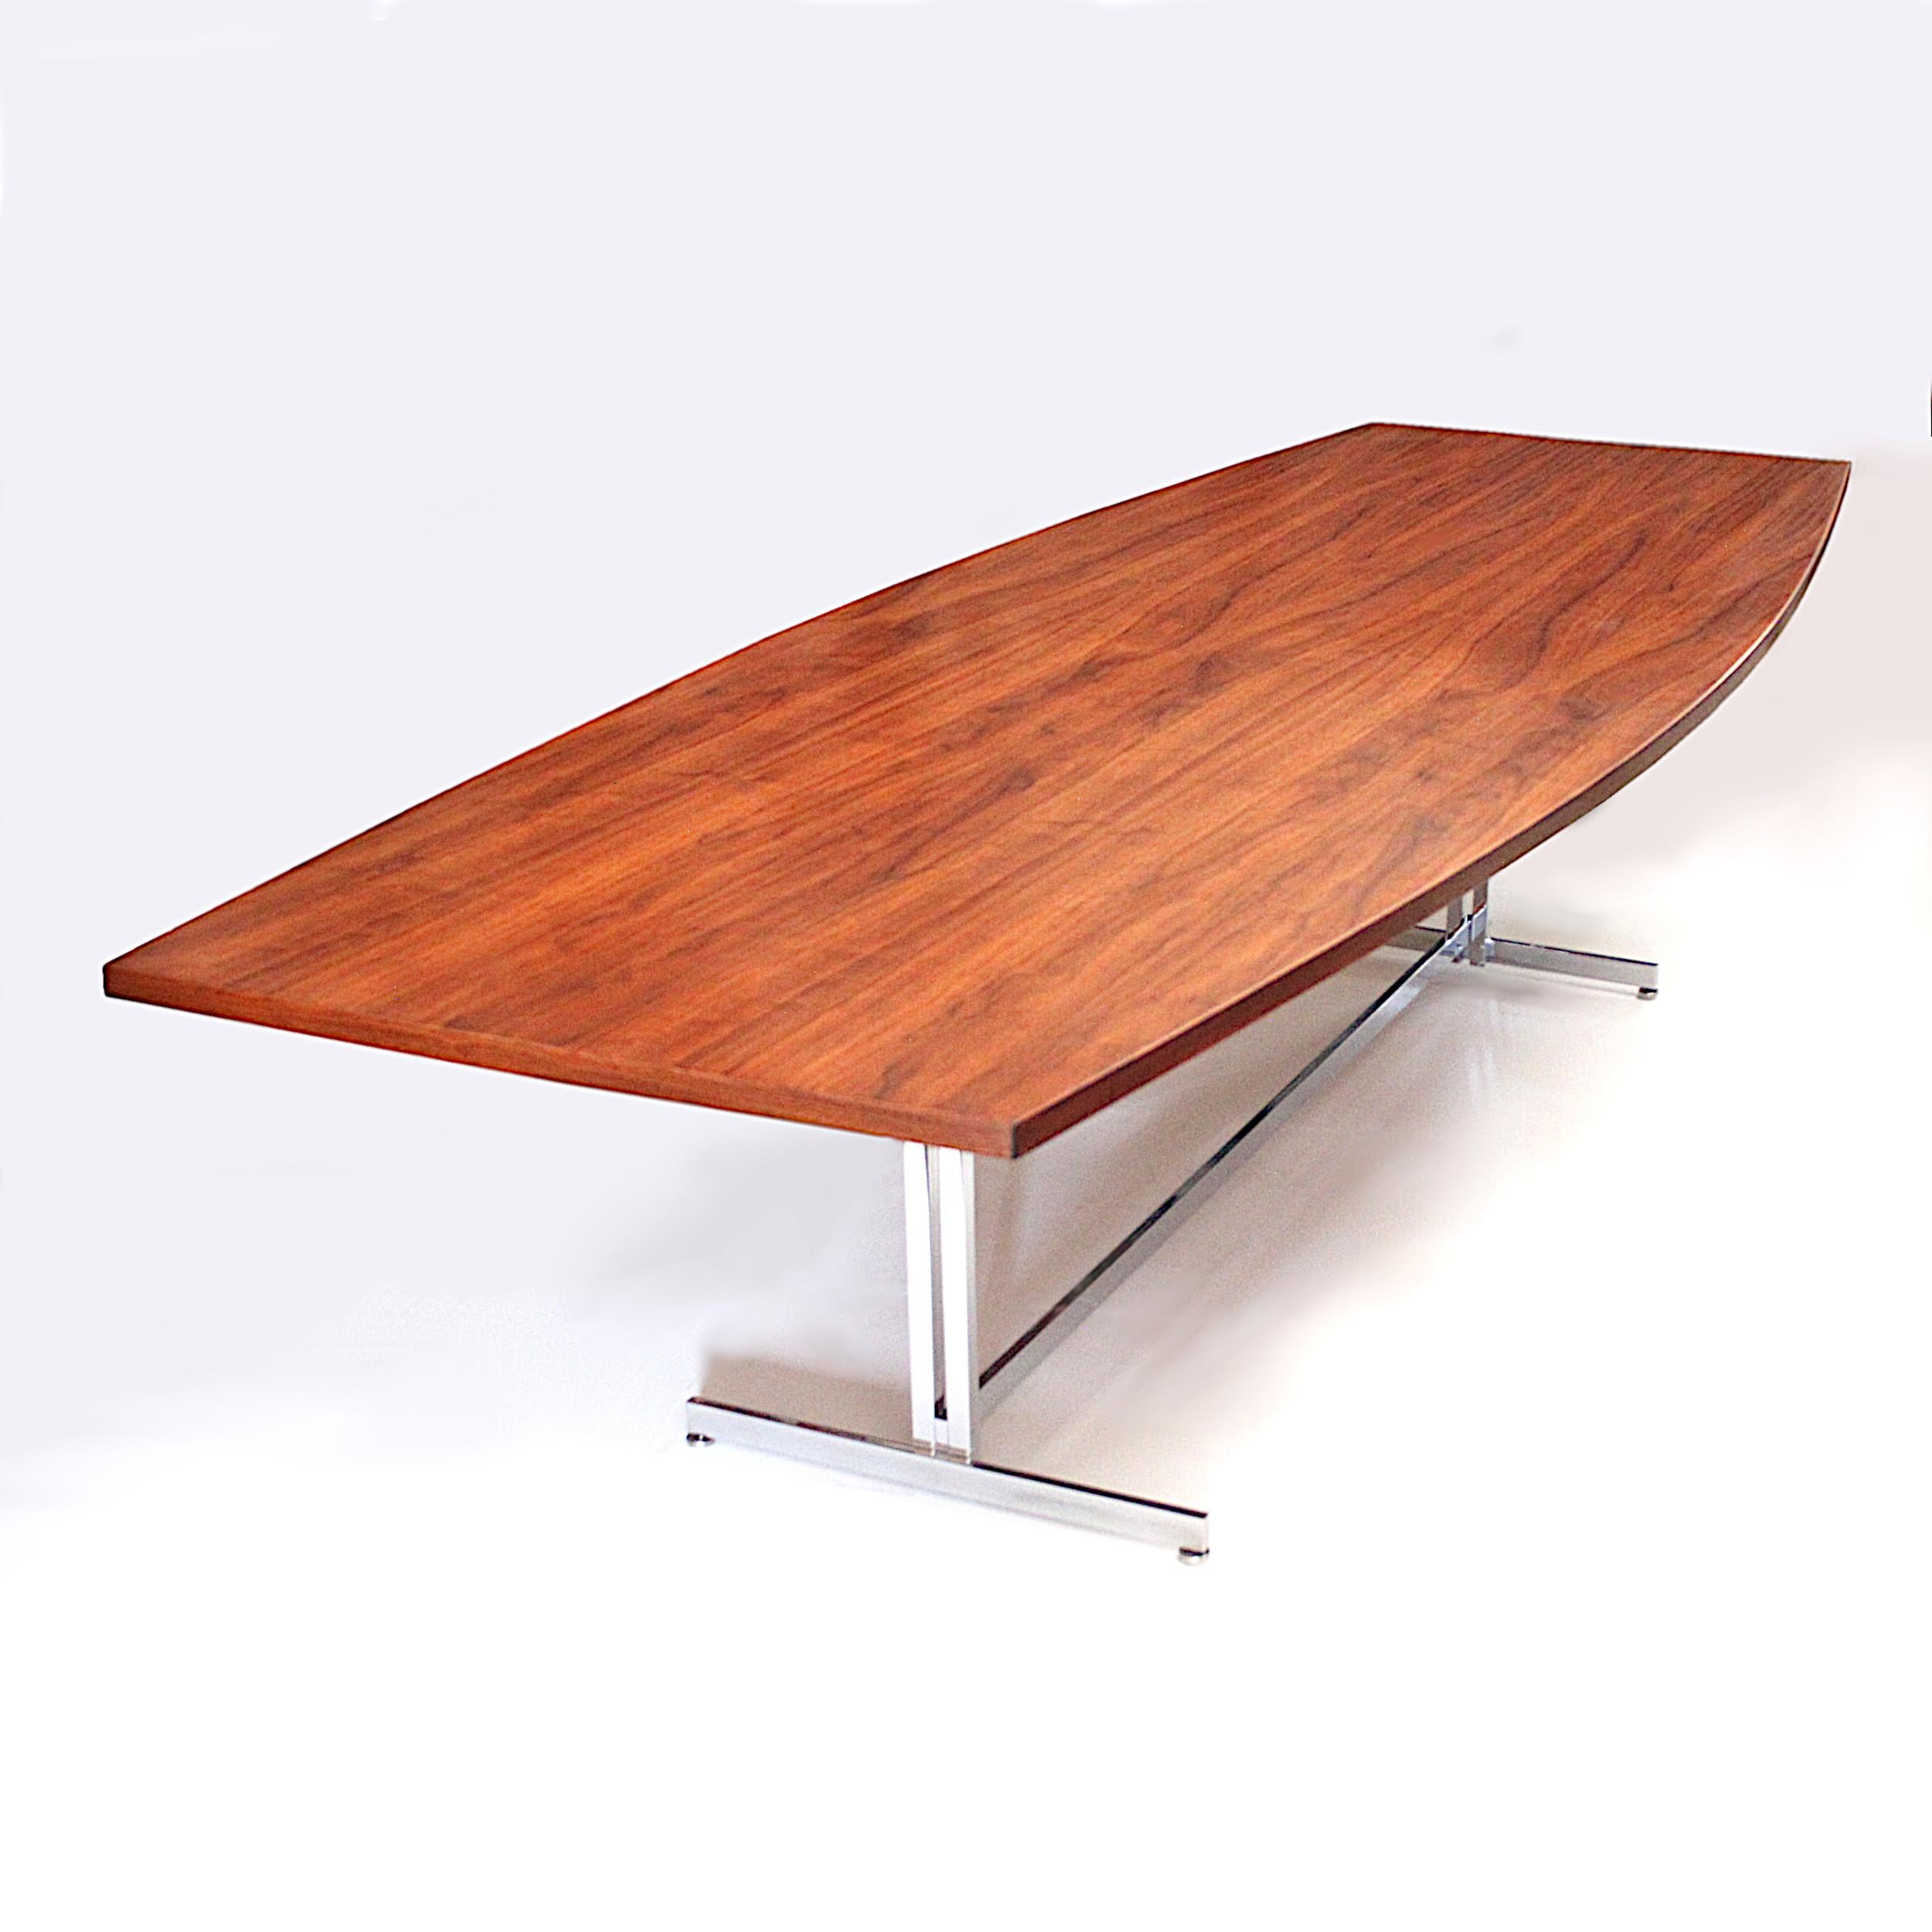 This spectacular table is a Hugh Acton original design made by Vecta Group. The huge boat-shaped top measures an impressive ten feet long and features gorgeous matched-grain walnut veneer. The unique trestle base gives the table a wonderful